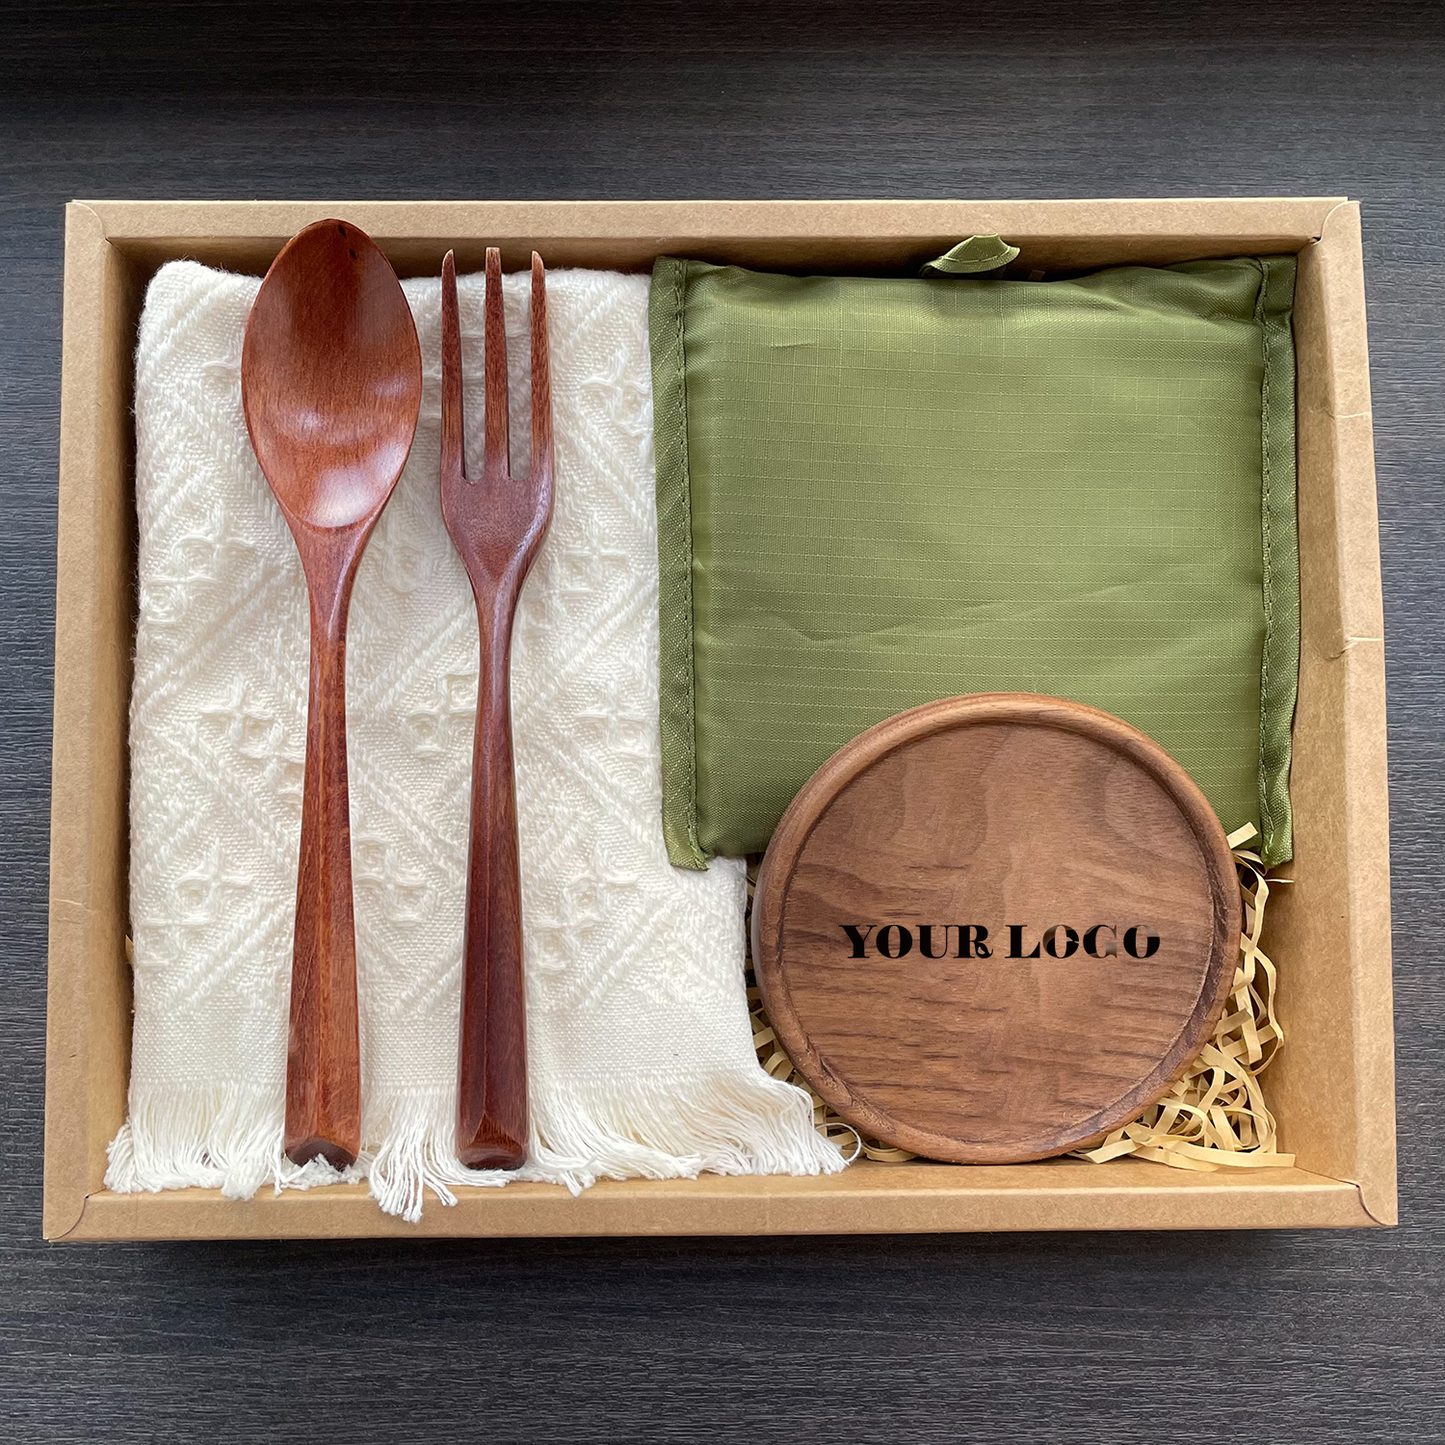 Wooden Coaster & Cutlery | Recycle Bag Gift Set - Walnut Wood